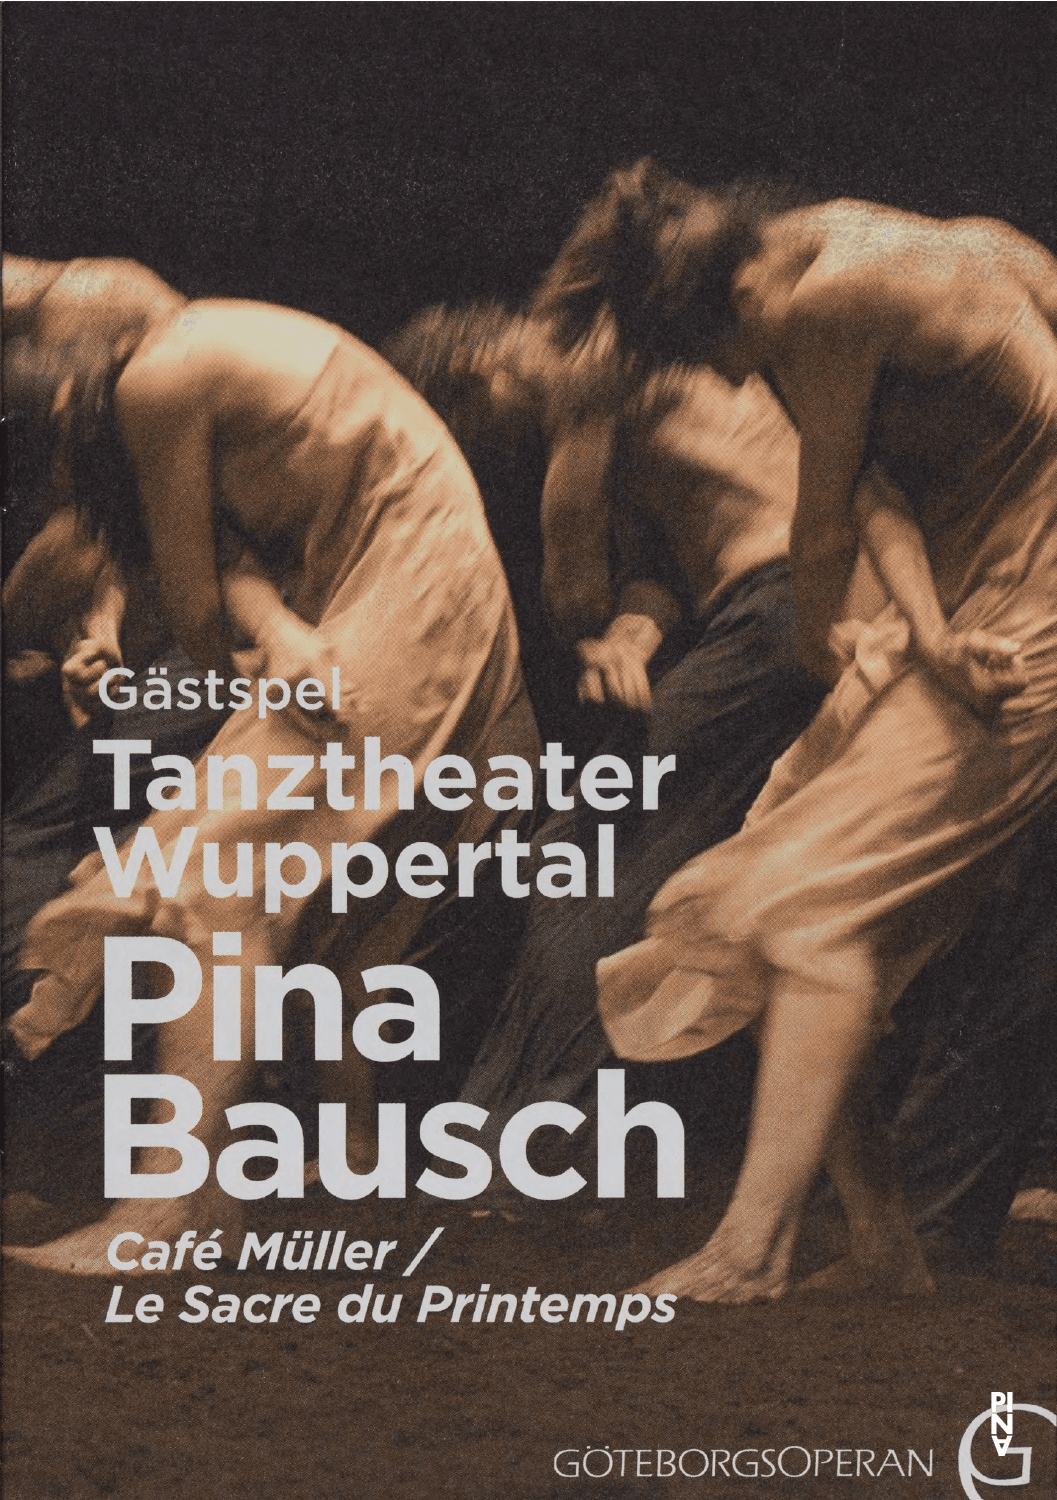 Booklet for “Café Müller” and “The Rite of Spring” by Pina Bausch with Tanztheater Wuppertal in in Gothenburg, 05/29/2013 – 05/31/2013